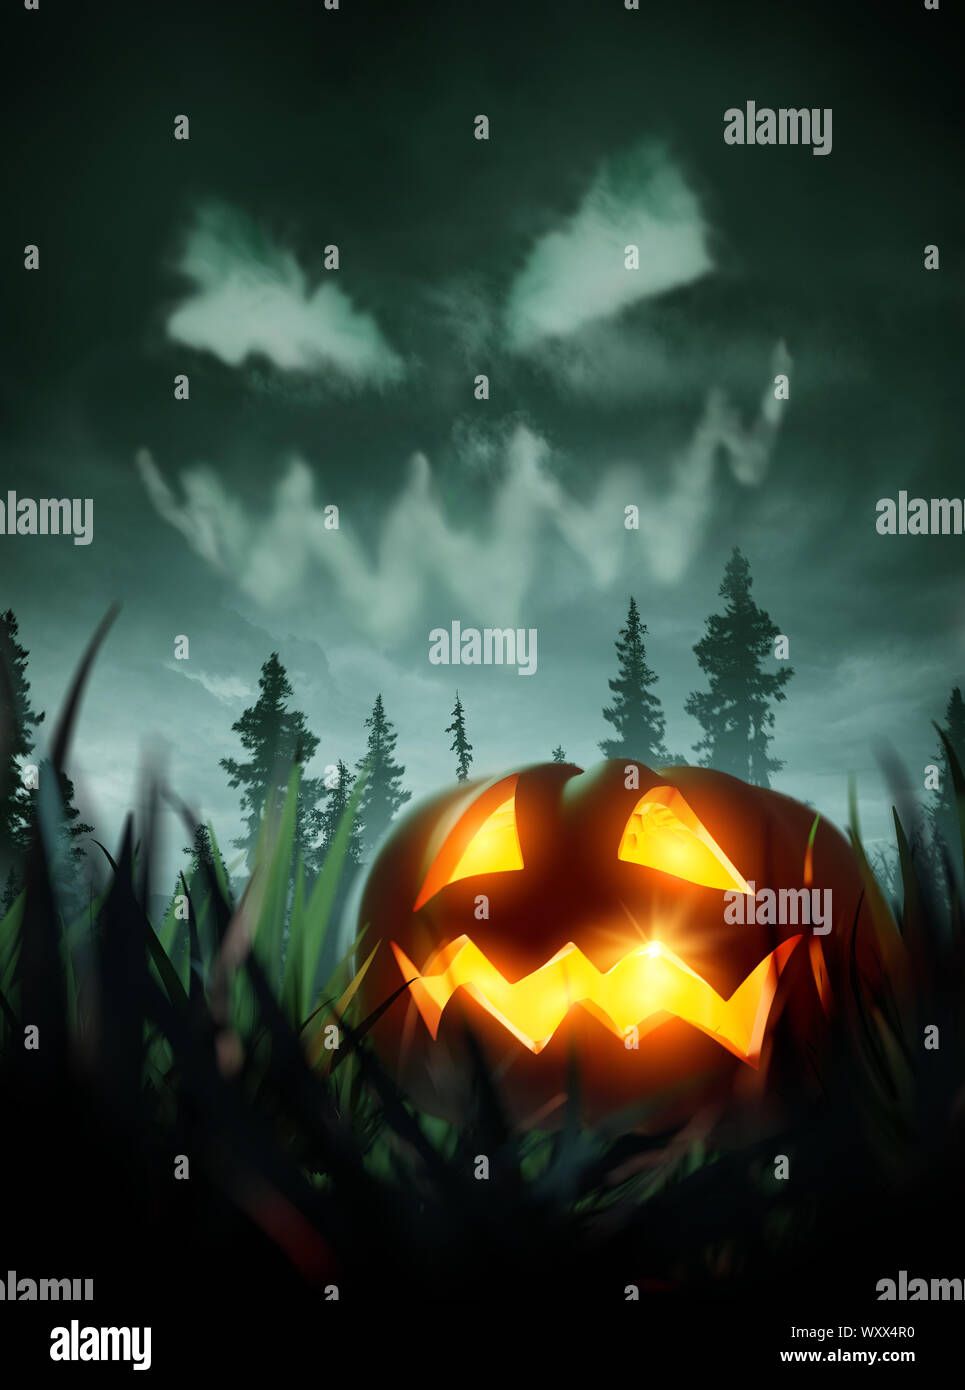 A pumpkin lantern glowing on the ground at night with a stormy sky and clouds forming an evil face. 3D illustration. Stock Photo